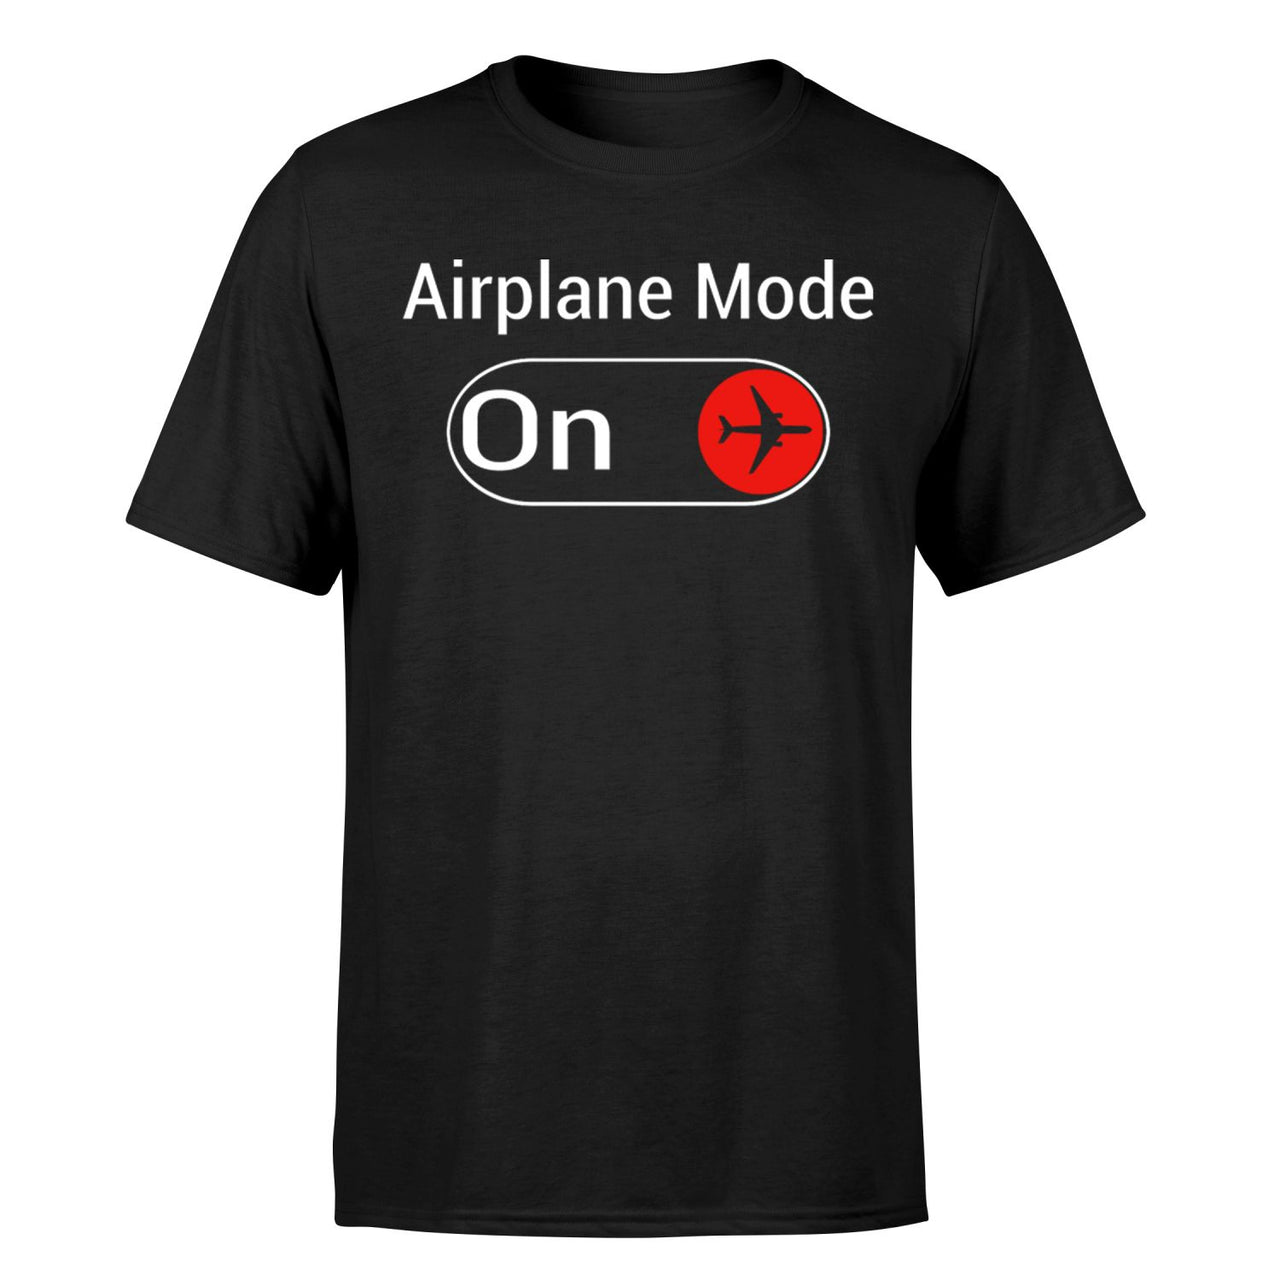 Airplane Mode On Designed T-Shirts